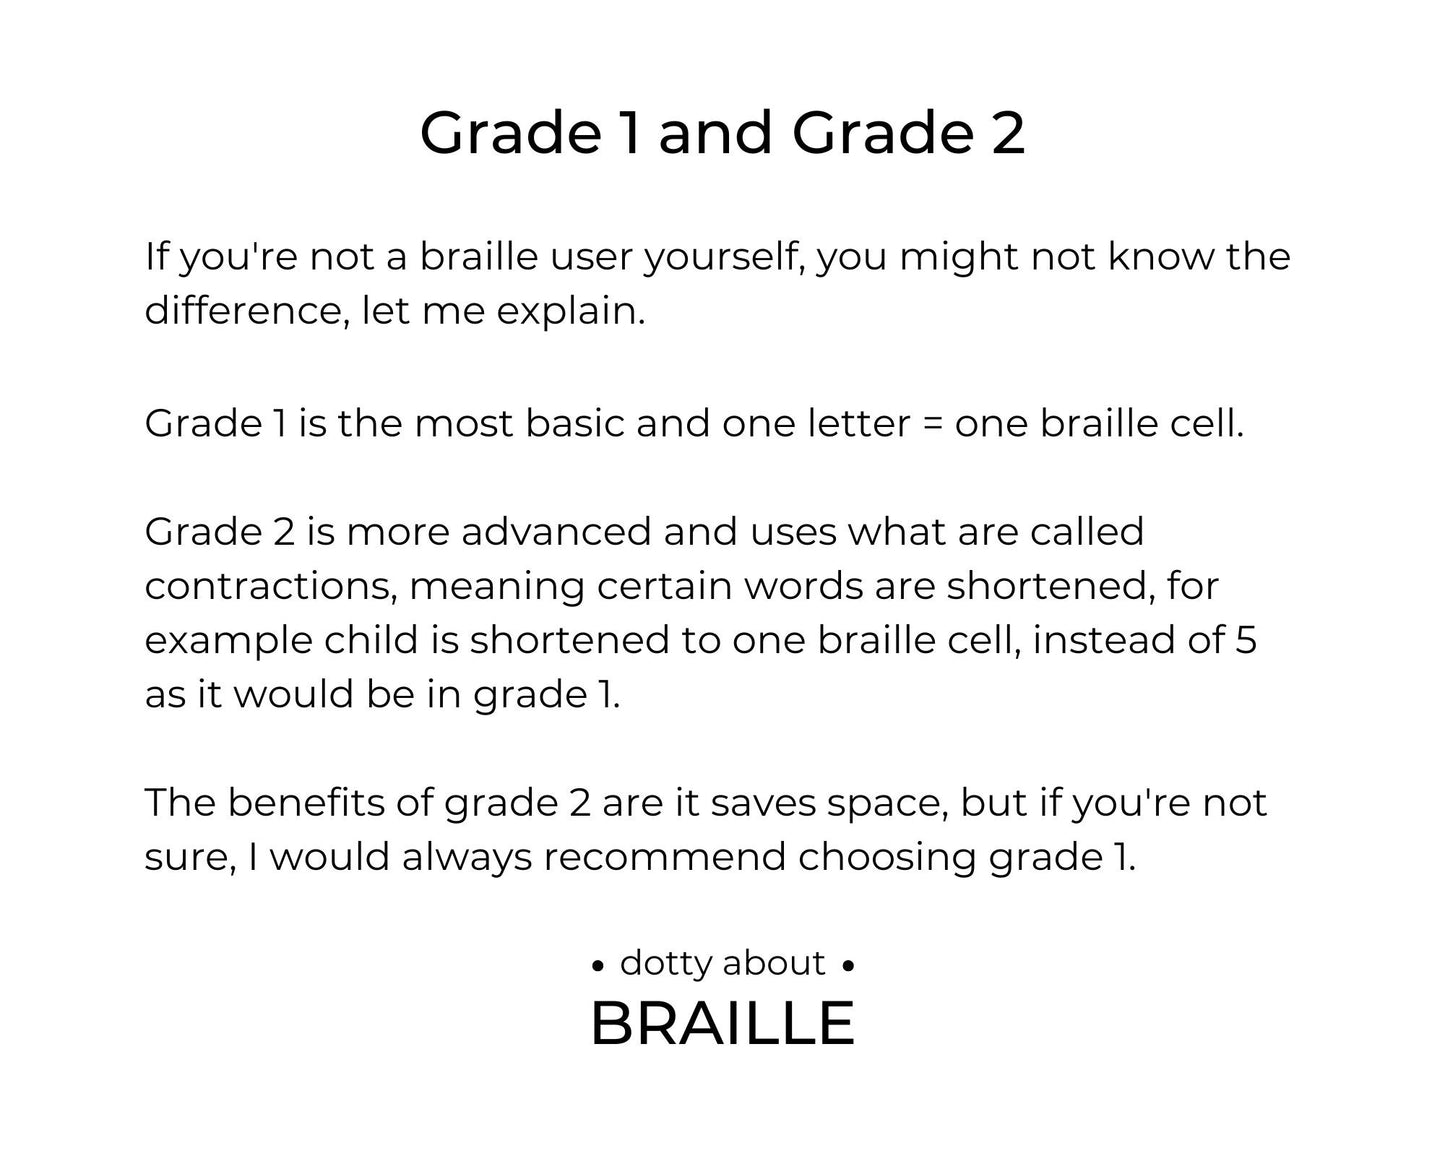 Grade 1 - is more basic and one letter = one braille cell. Grade 2 - is more advanced and uses contractions to save space, such as child would be shortened to one braille cell, instead of 5. Would always recommend grade 1 if not sure.